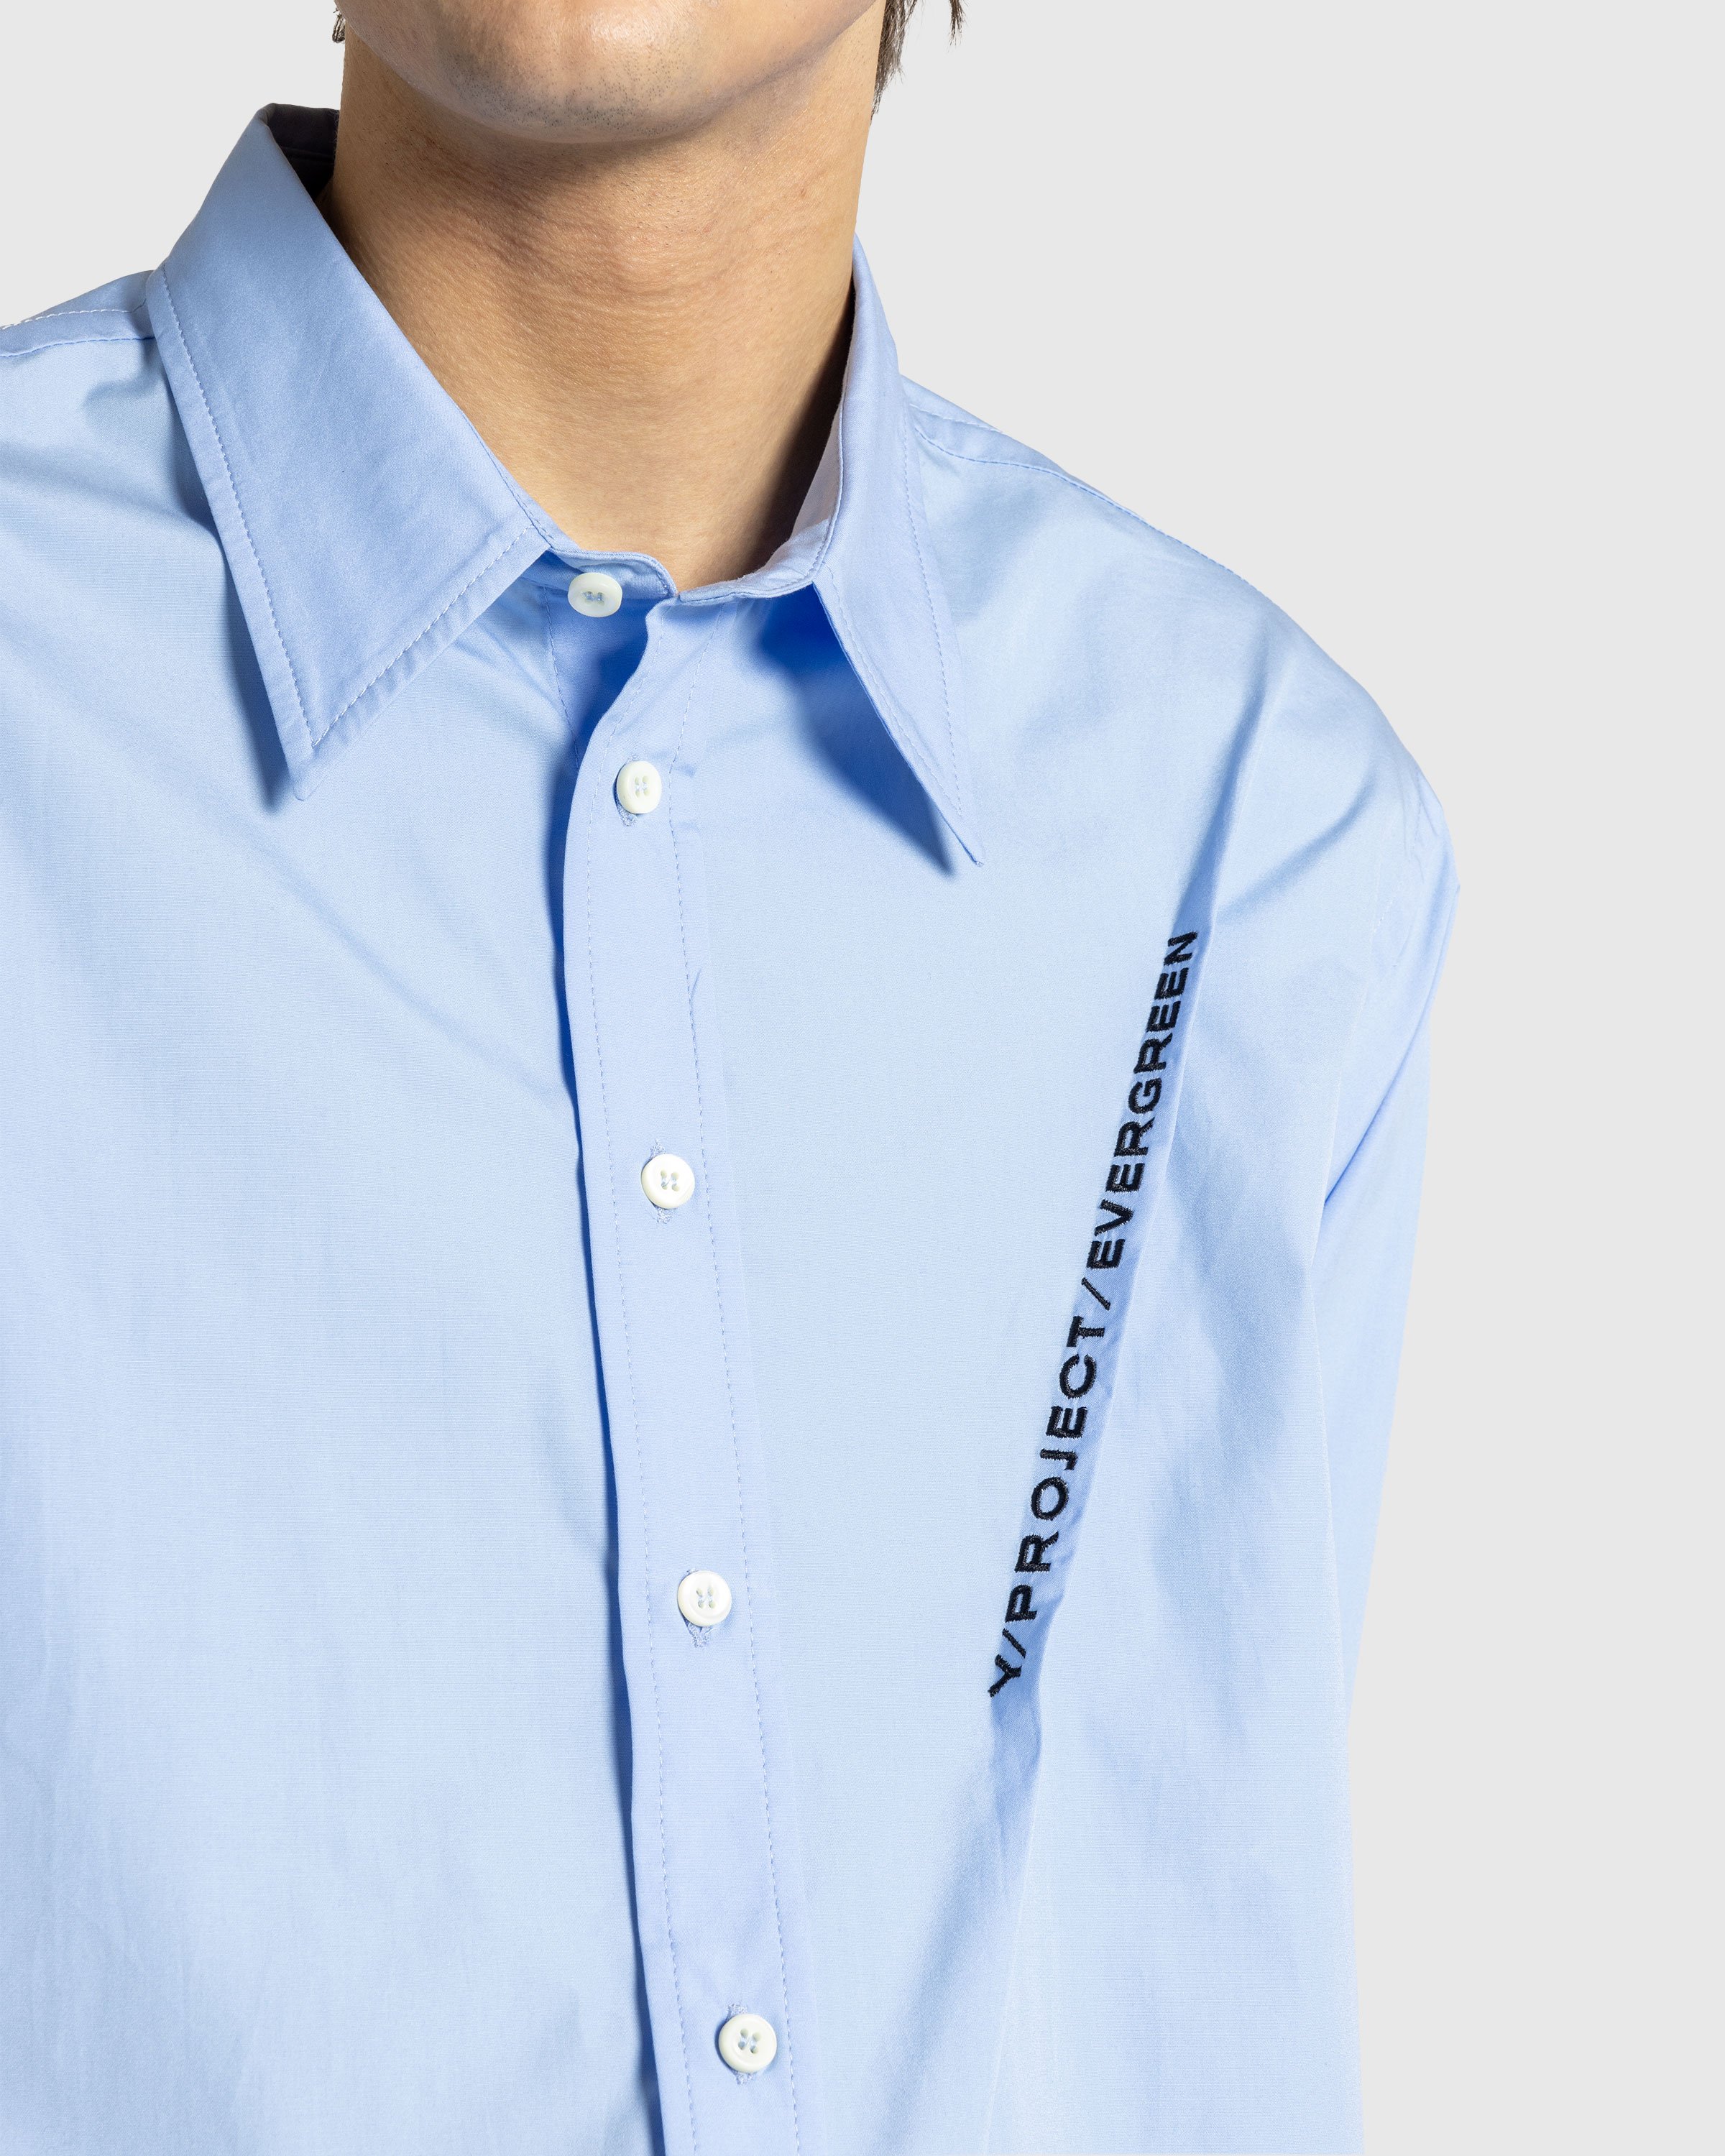 Y/Project - Evergreen Pinched Logo Shirt Light Blue - Clothing - Blue - Image 5